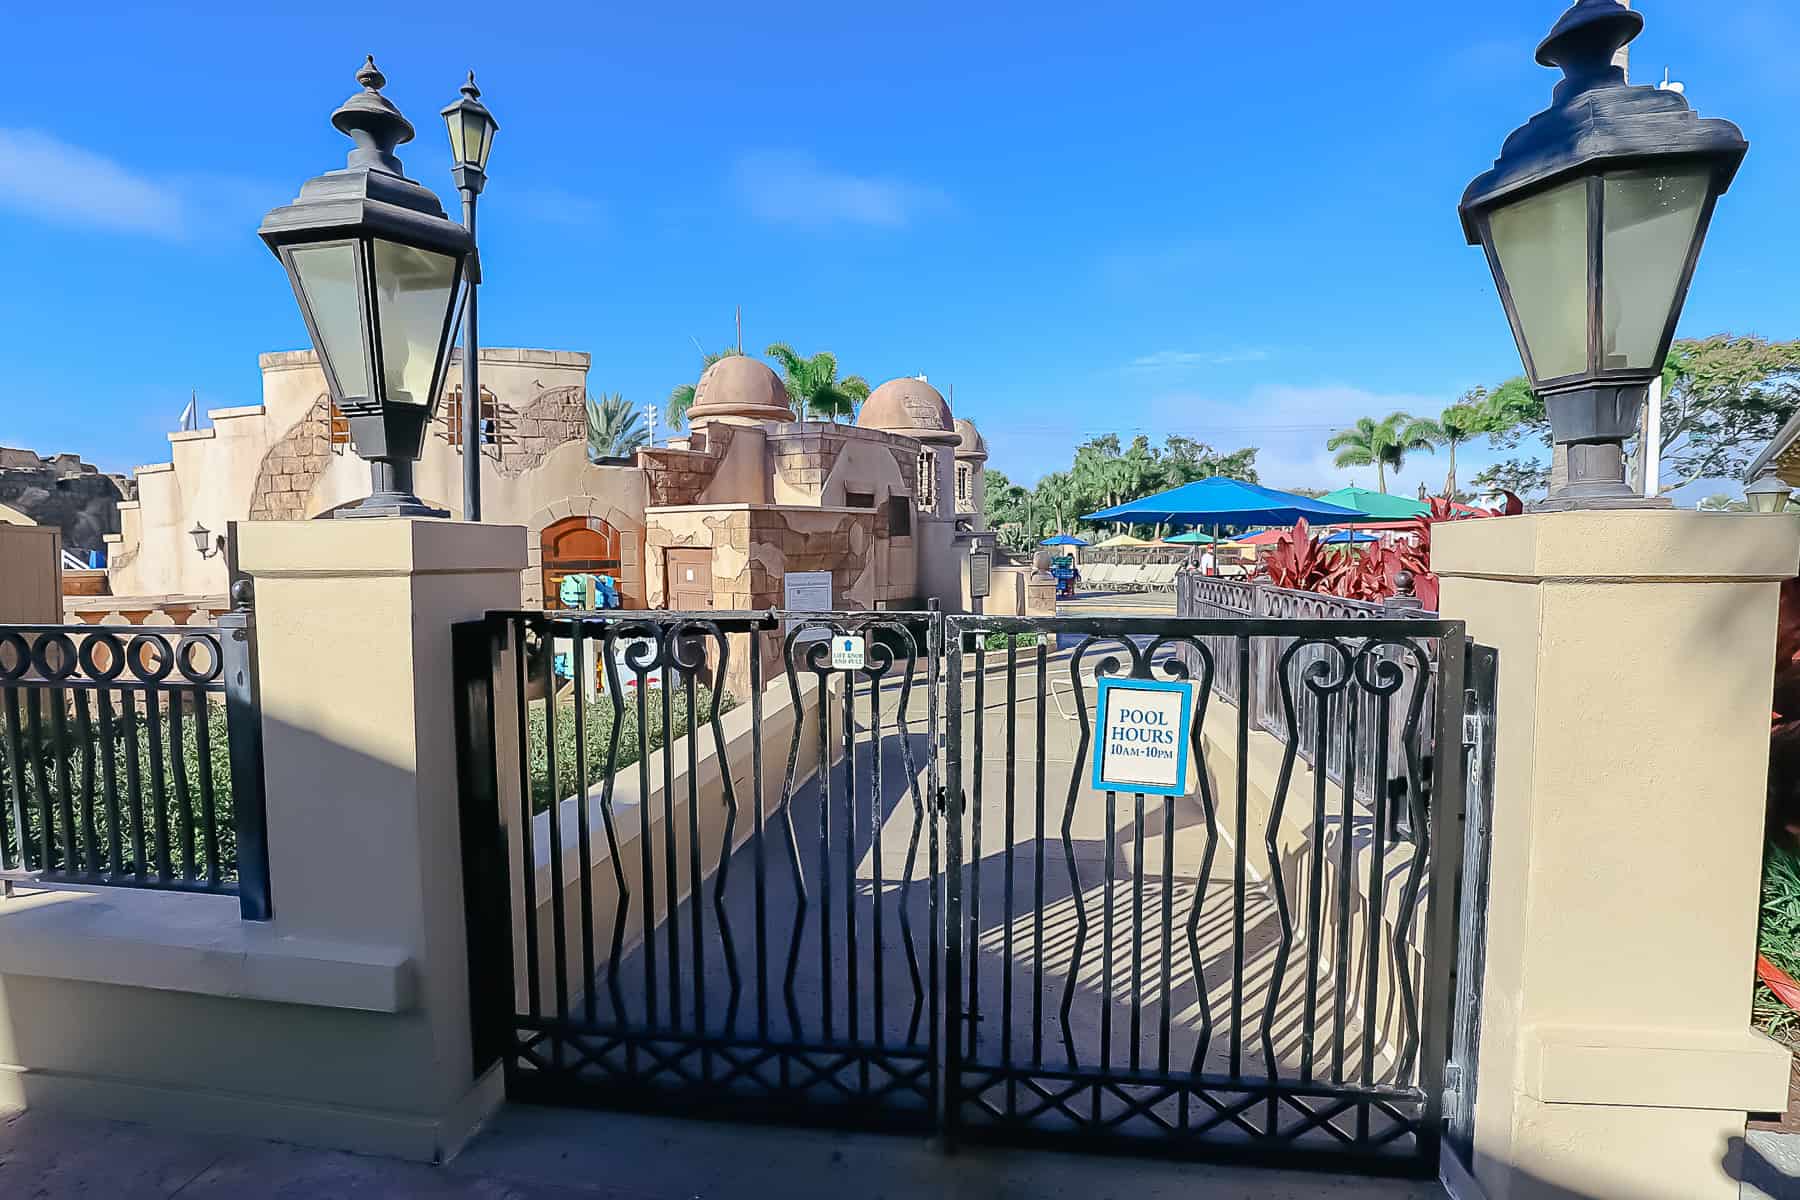 Feature pool hours are posted on the gate at Disney's Caribbean Beach as 10:00 a.m. until 10:00 p.m. 